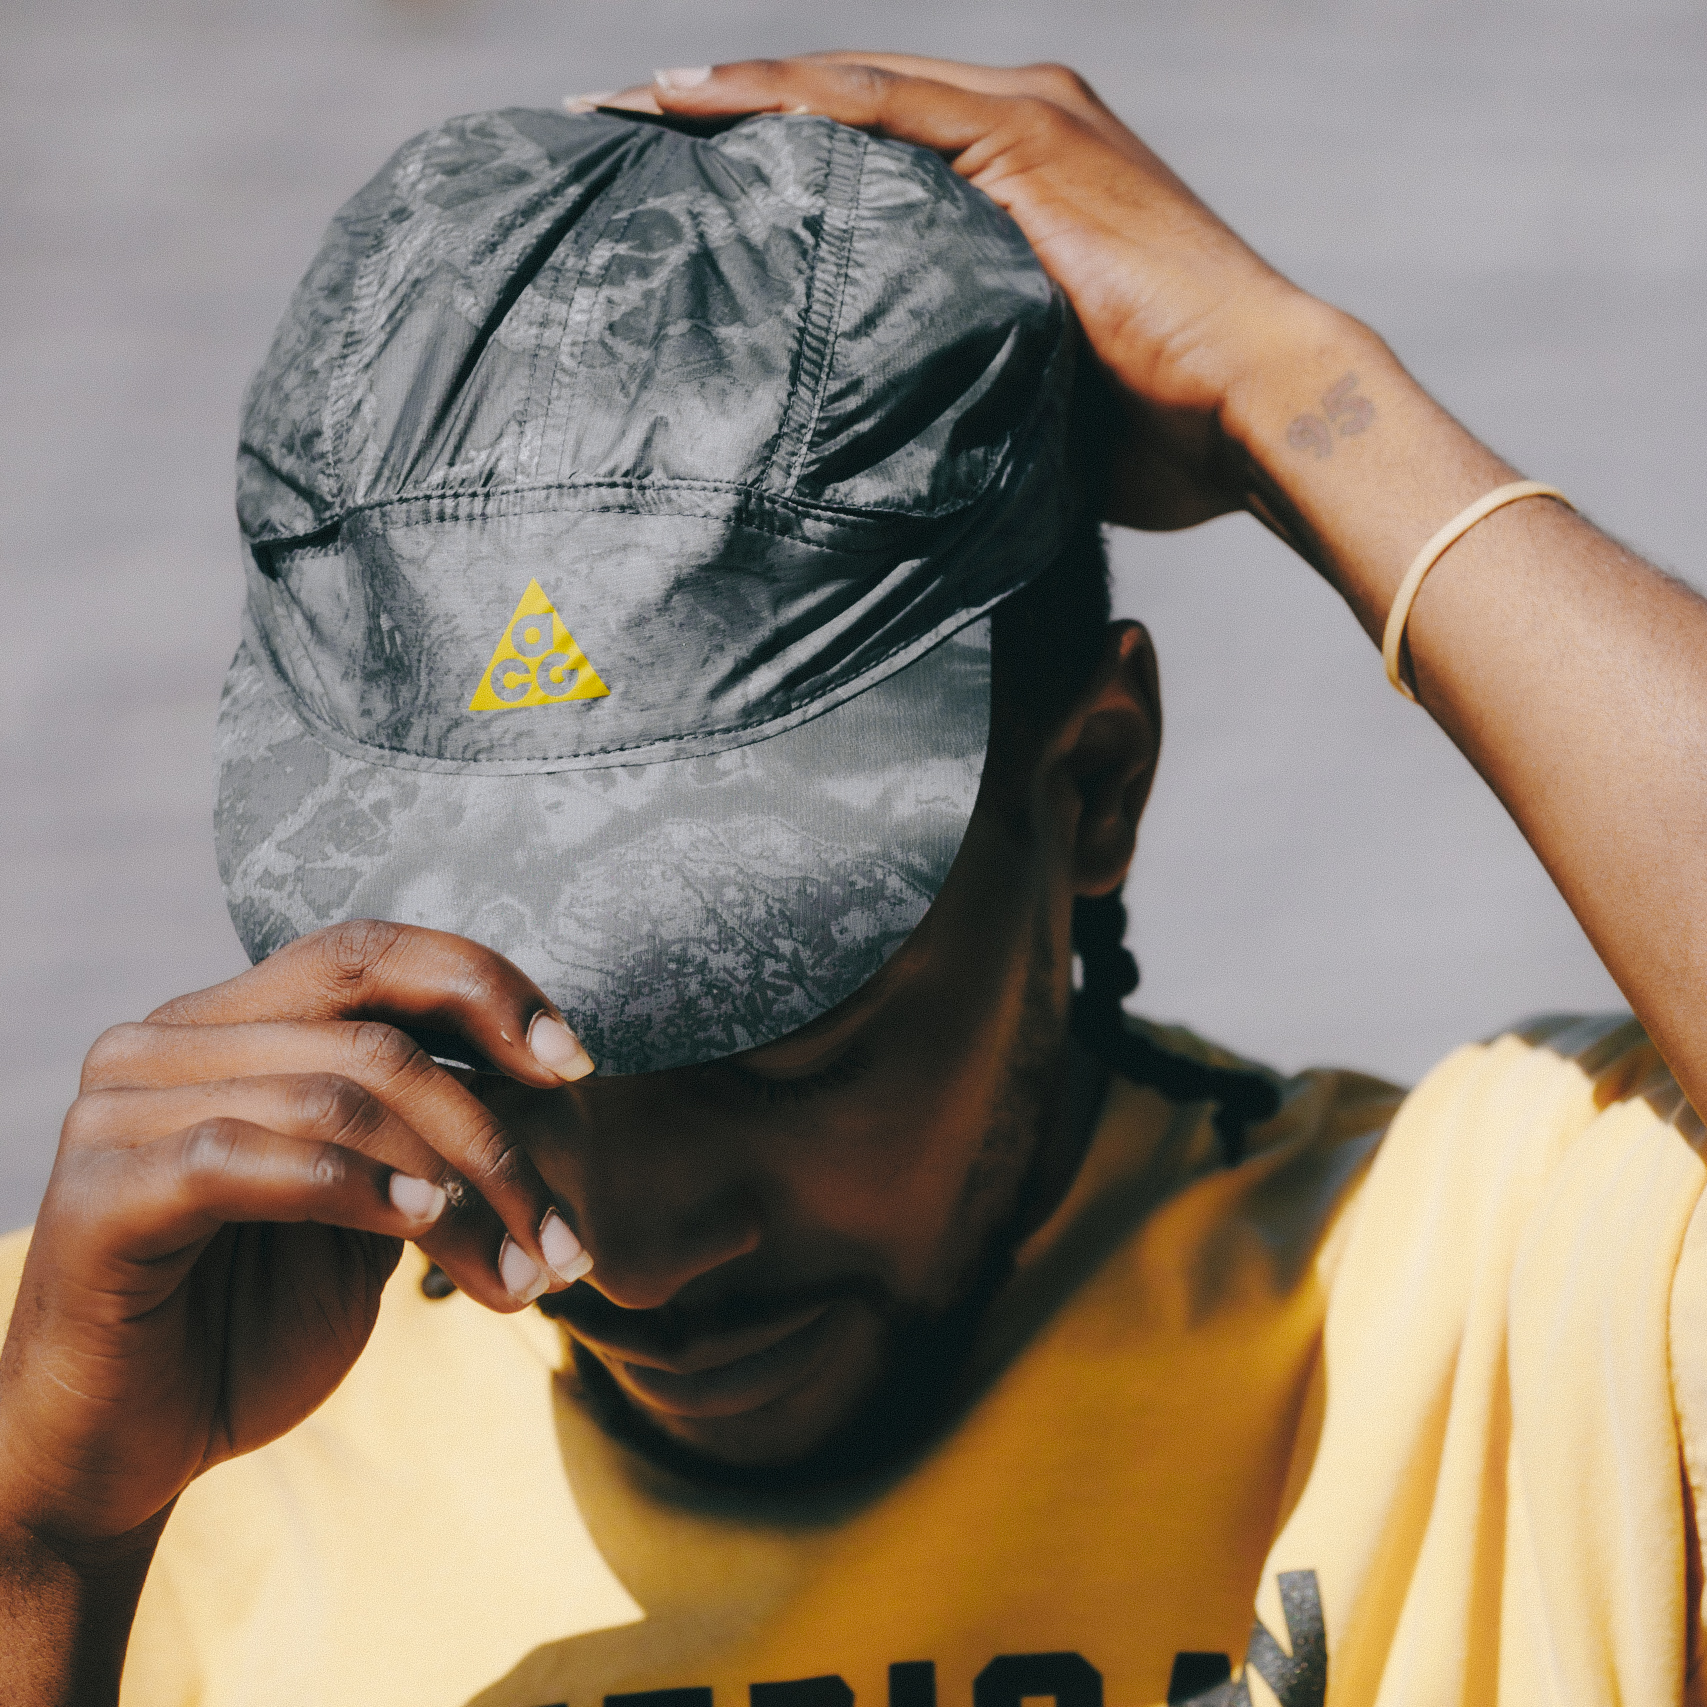 Burn Rubber on "The ACG Realtree Tailwind Cap (Black) is available now in-store and online @ https://t.co/7c96Dhzndv 📸 @trilogybeats https://t.co/kYijuPhjxK" / Twitter